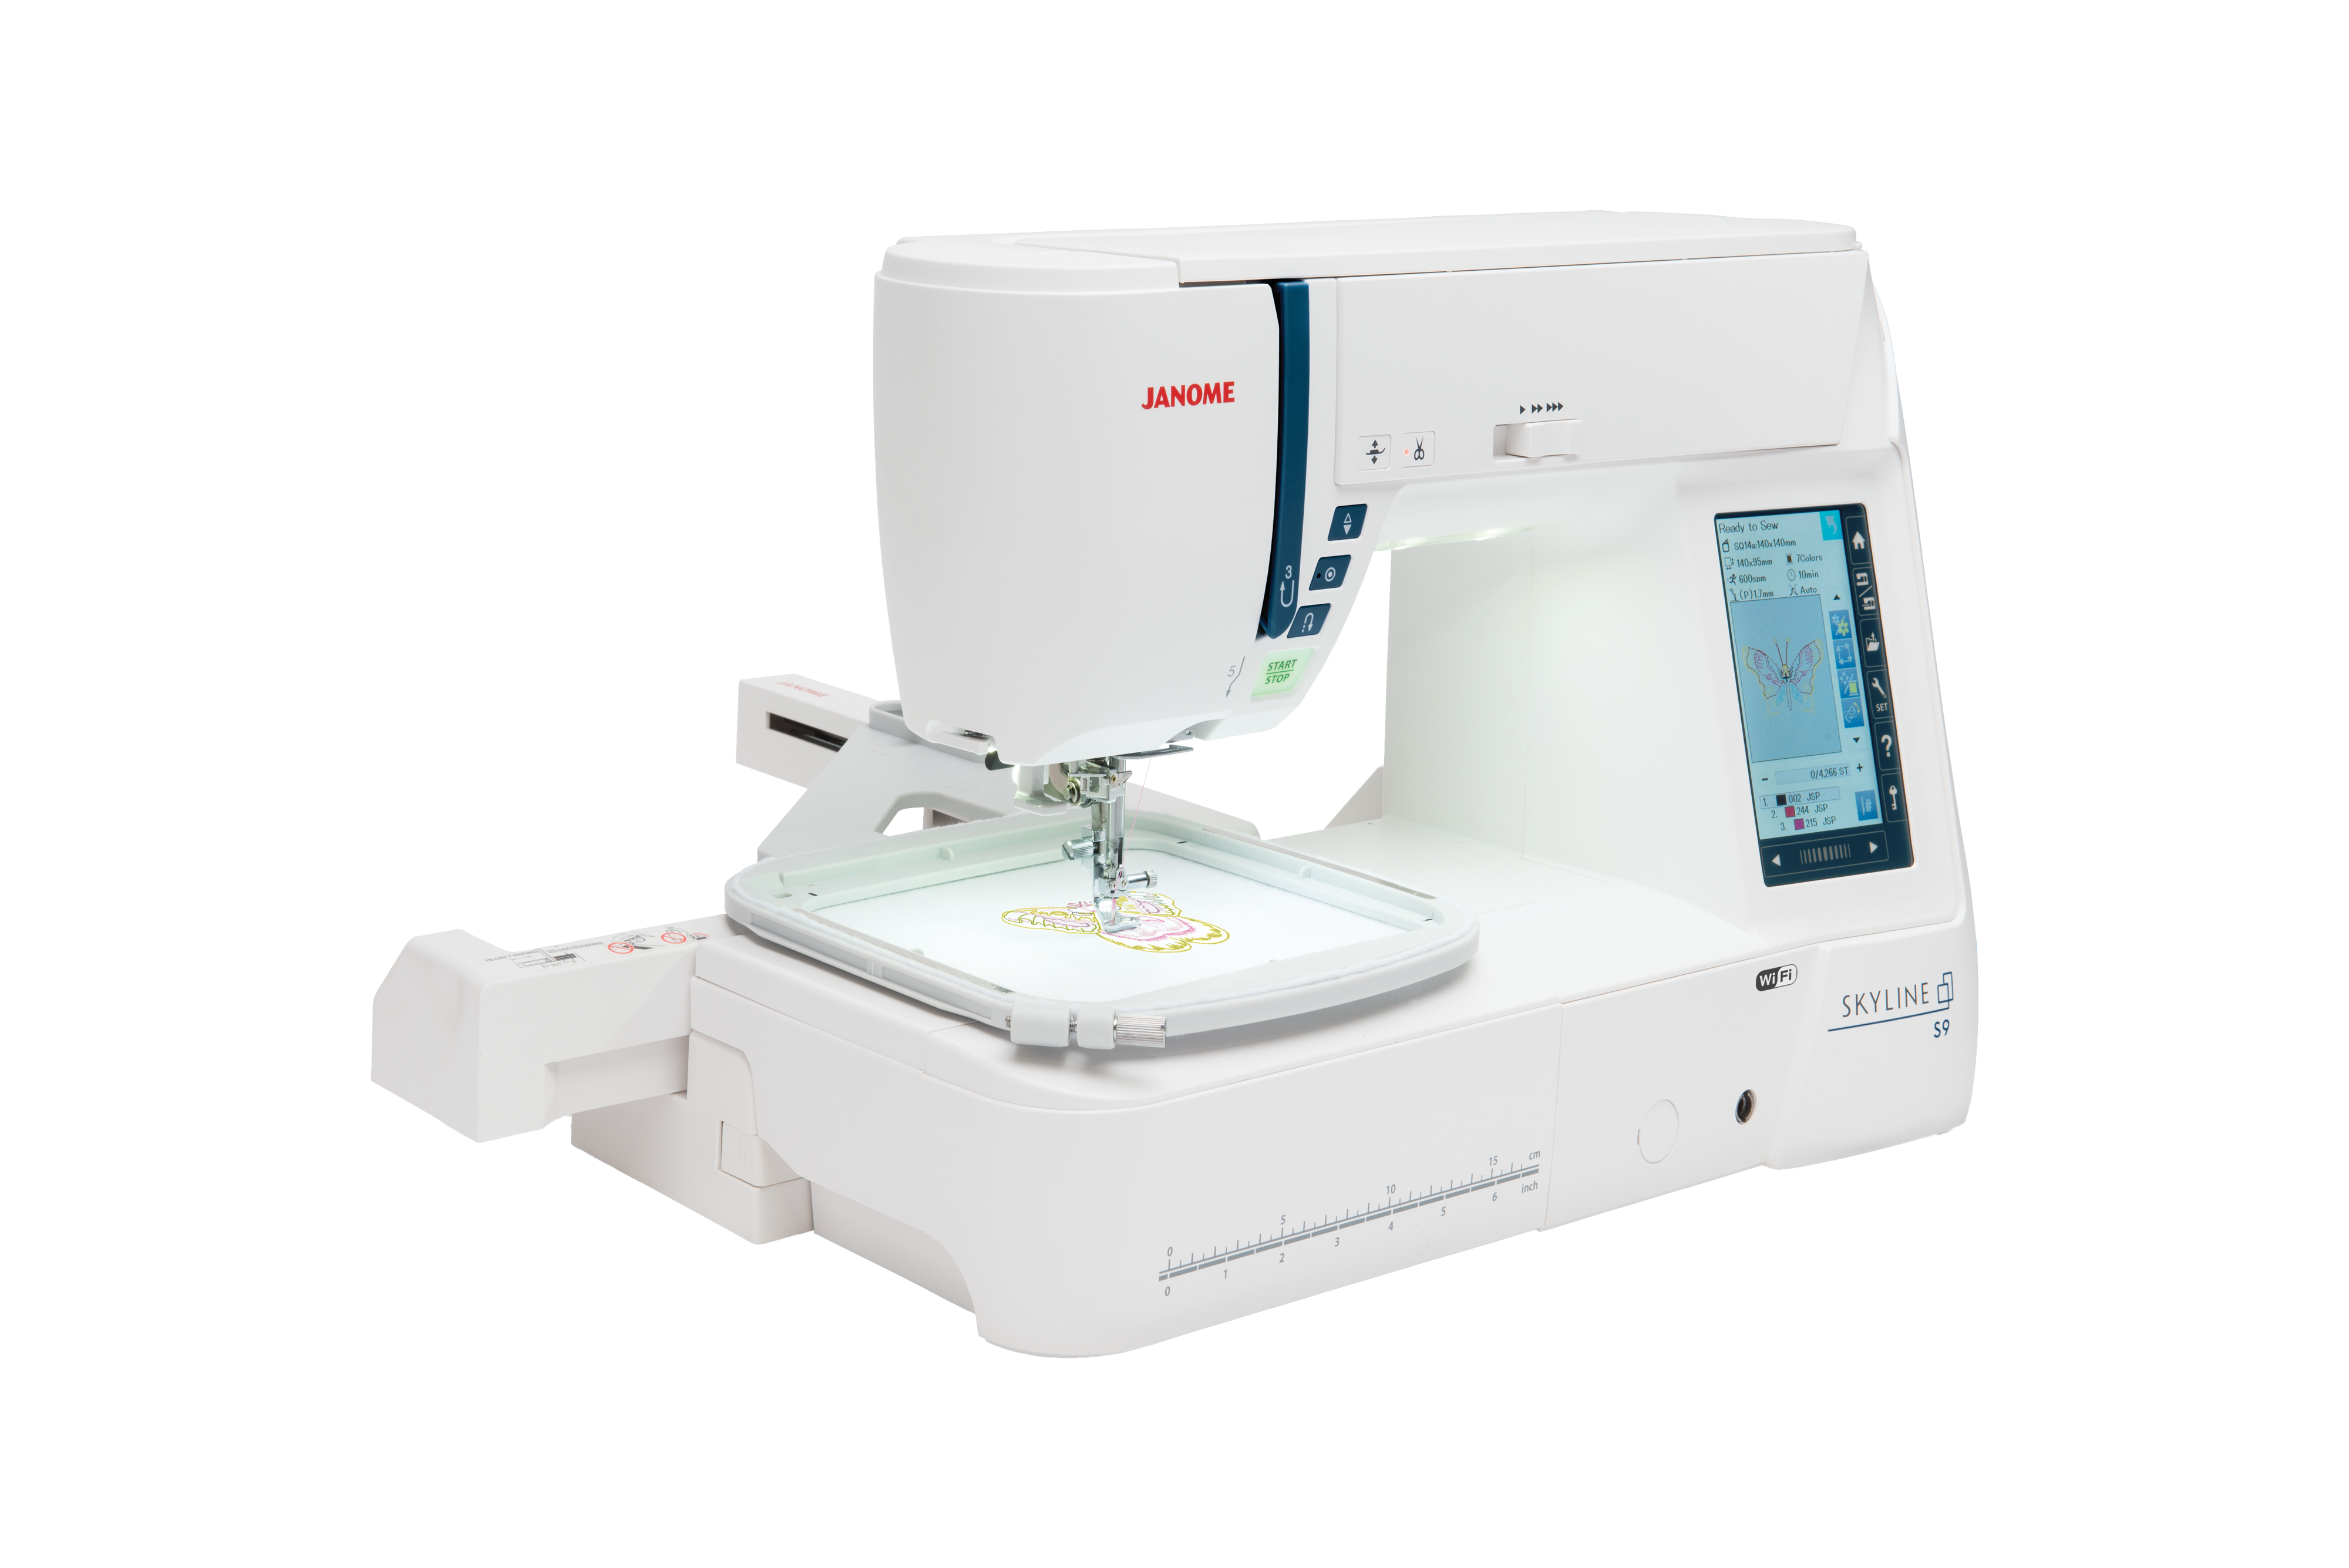 Janome Skyline S9 Sewing Quilting and Embroidery Machine for Sale at World Weidner